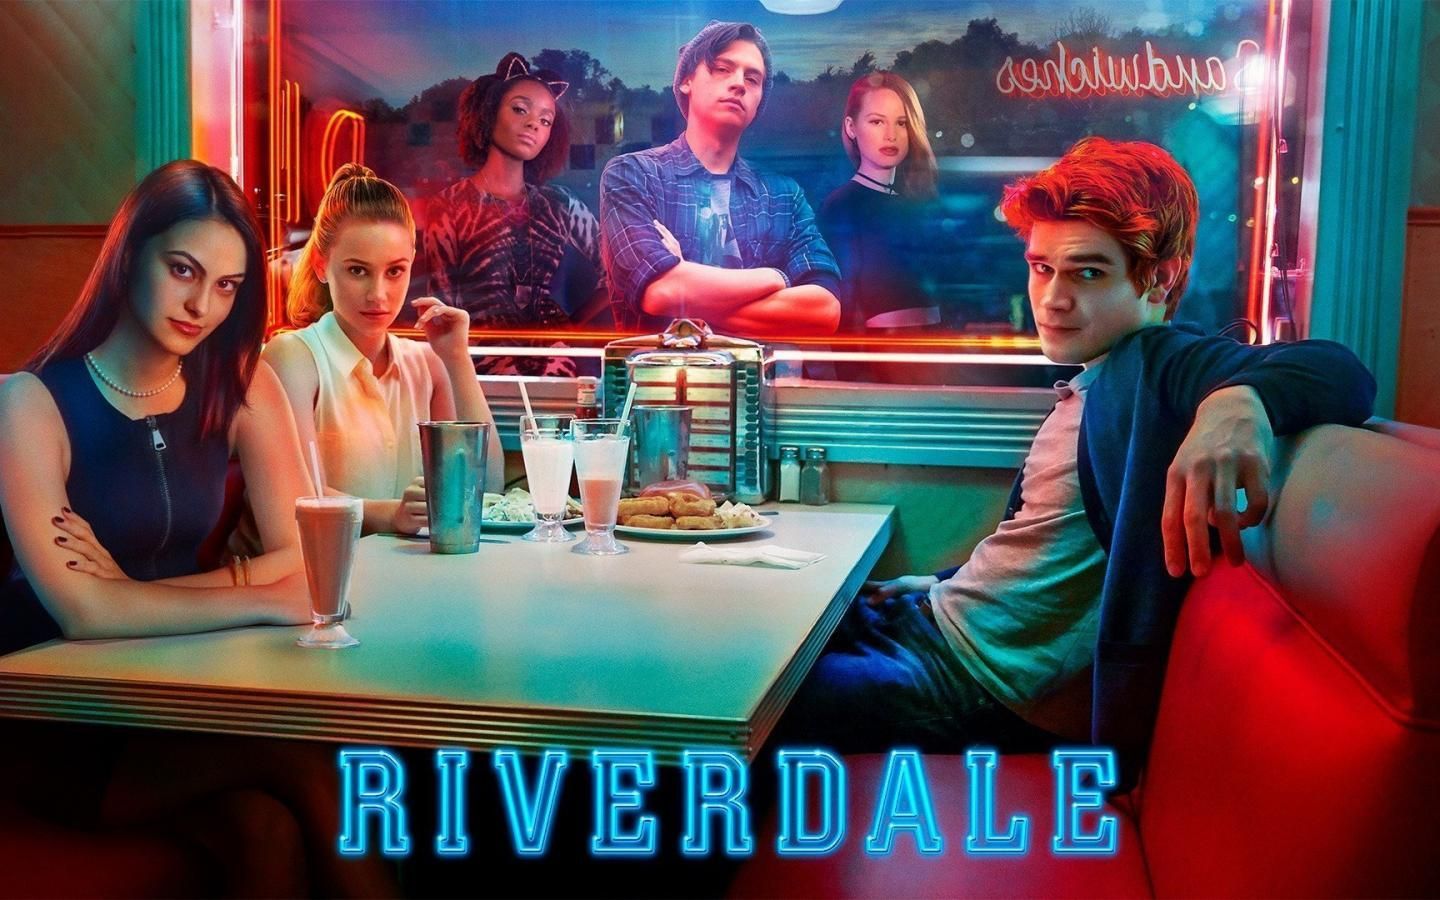 The Resident Star Erinn Westbrook To Join Popular Teen Drama Riverdale! Know All The Gossip About Season 5!